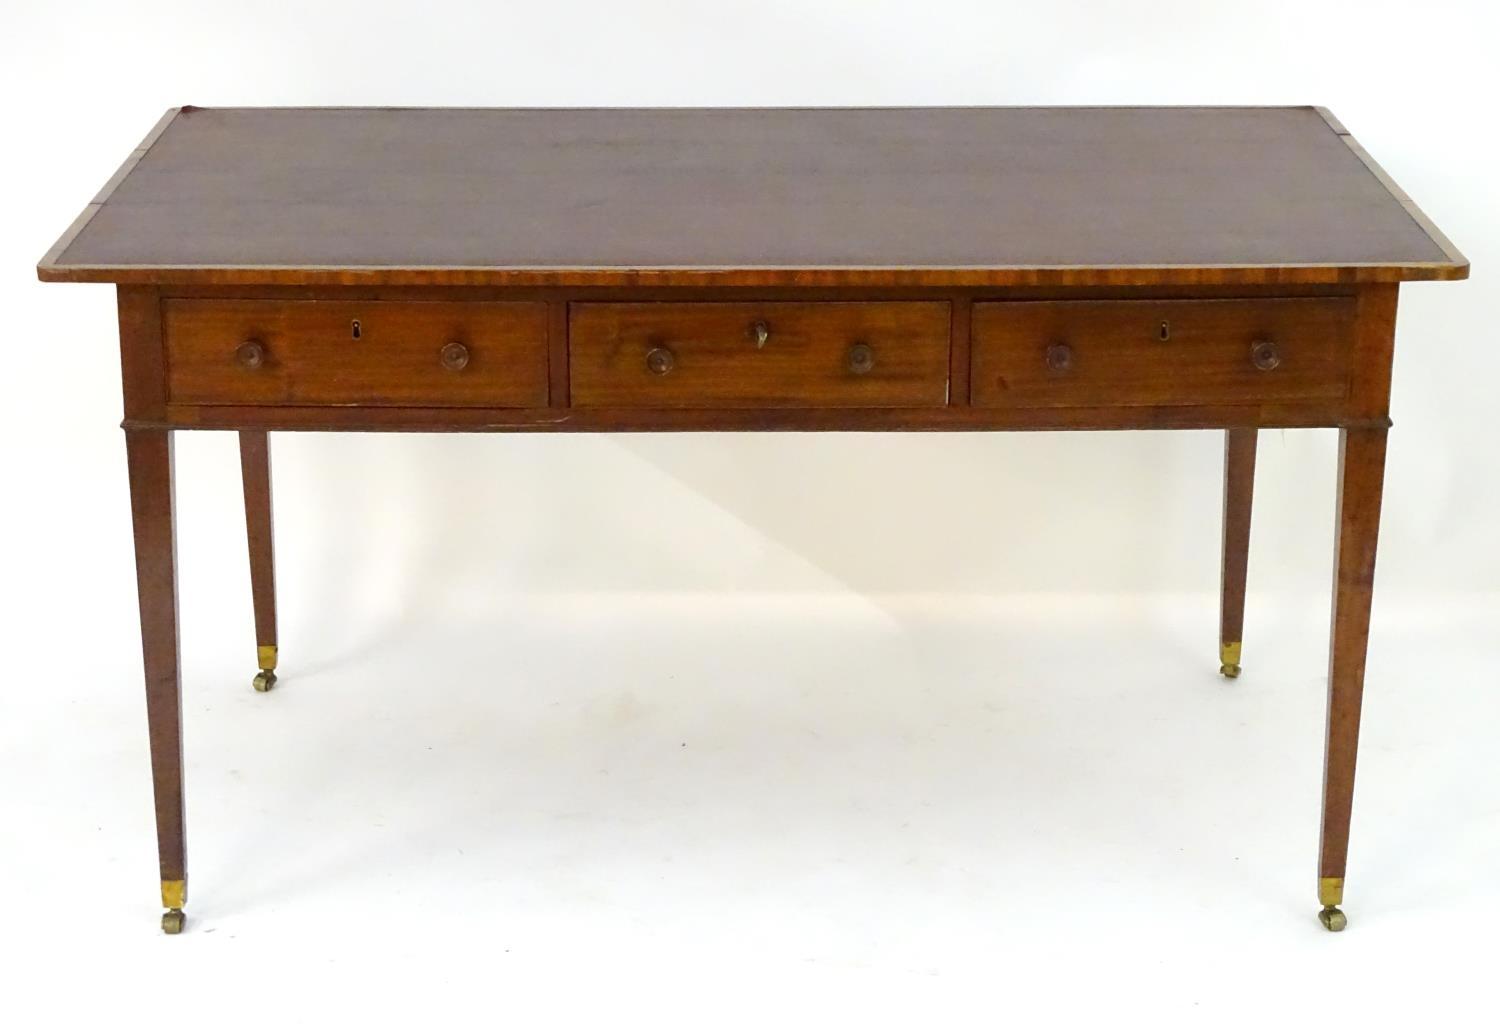 A late 18thC / early 19thC mahogany writing table with an inset top above three short drawers and - Image 4 of 7